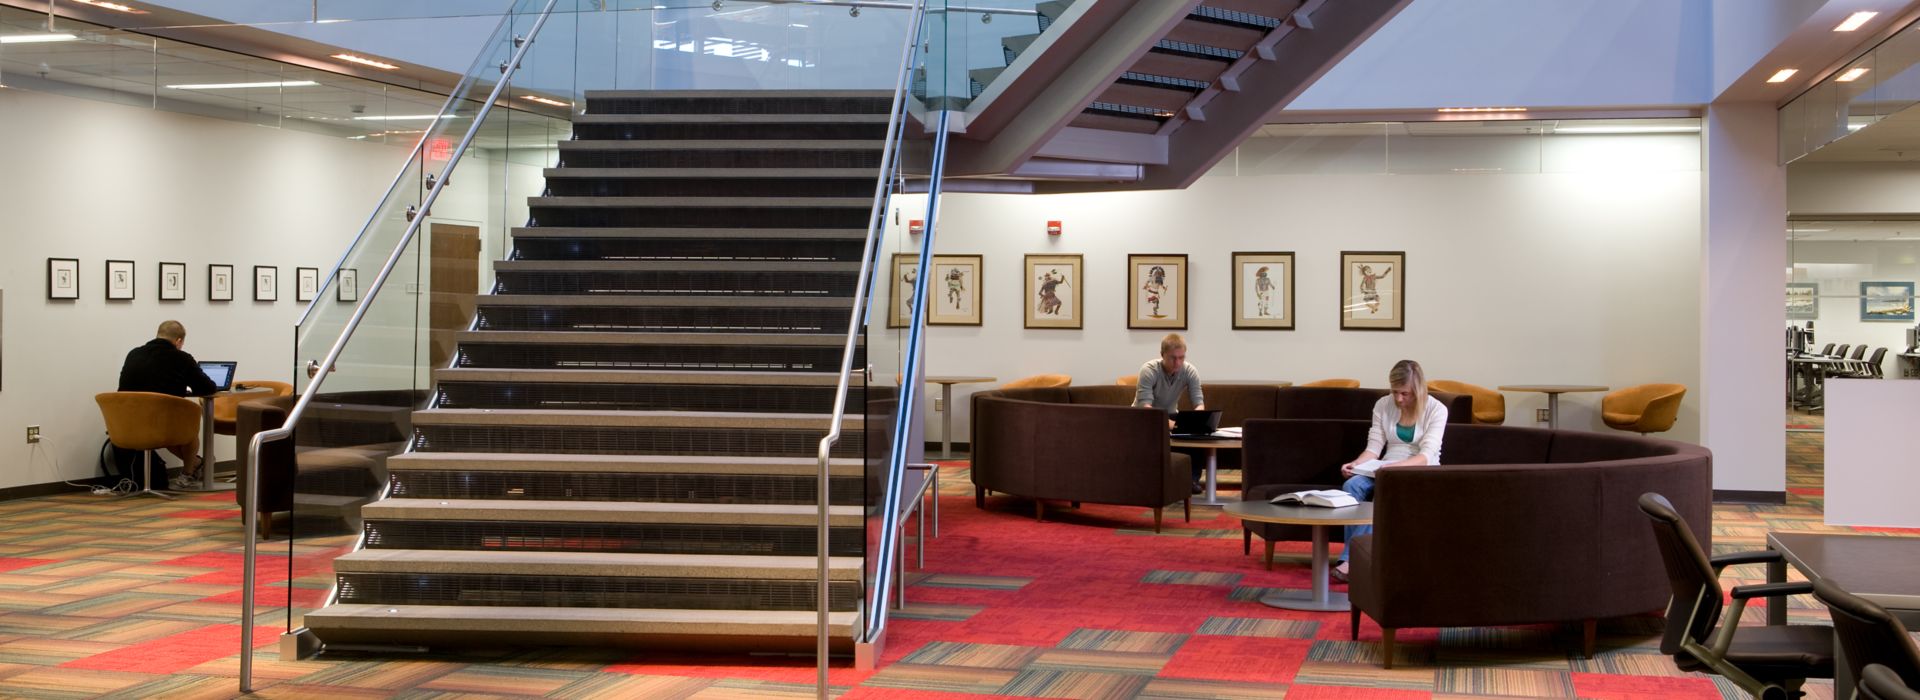 Interface Chenille Warp and Syncopation carpet tile in lobby of library with staircase imagen número 1